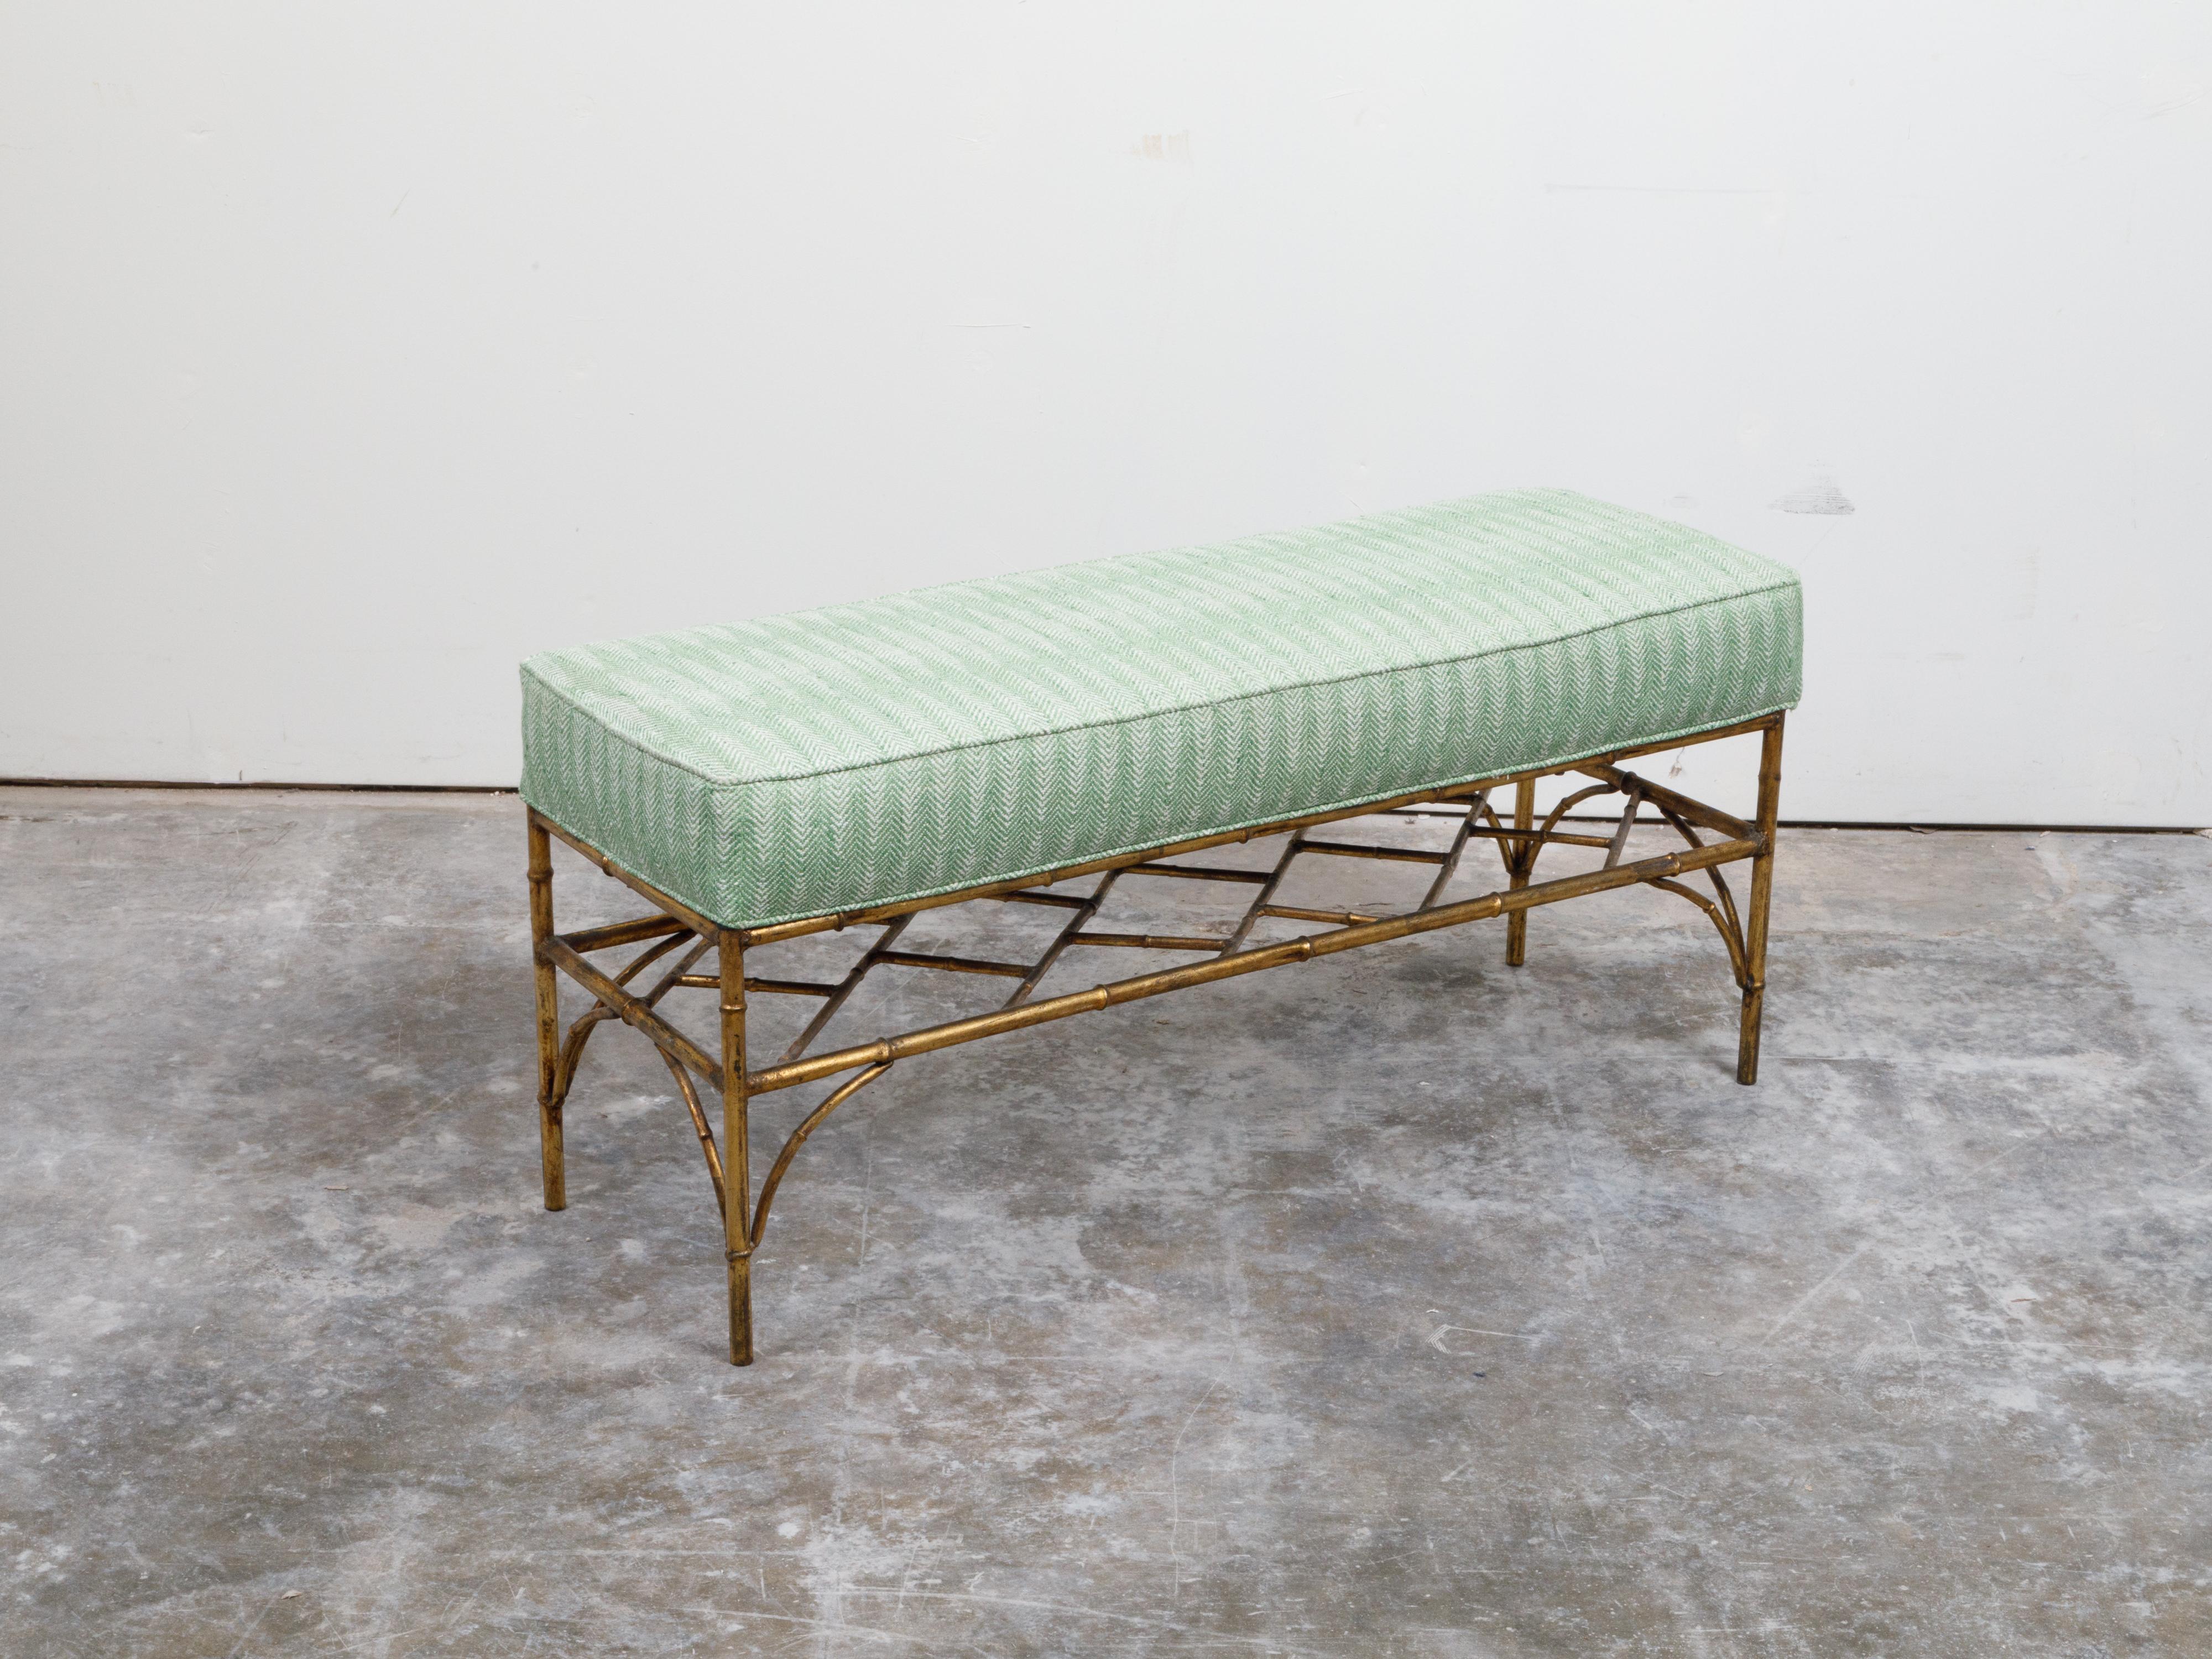 Italian Midcentury Gilt Metal Faux Bamboo Bench with Green Upholstered Seat For Sale 1